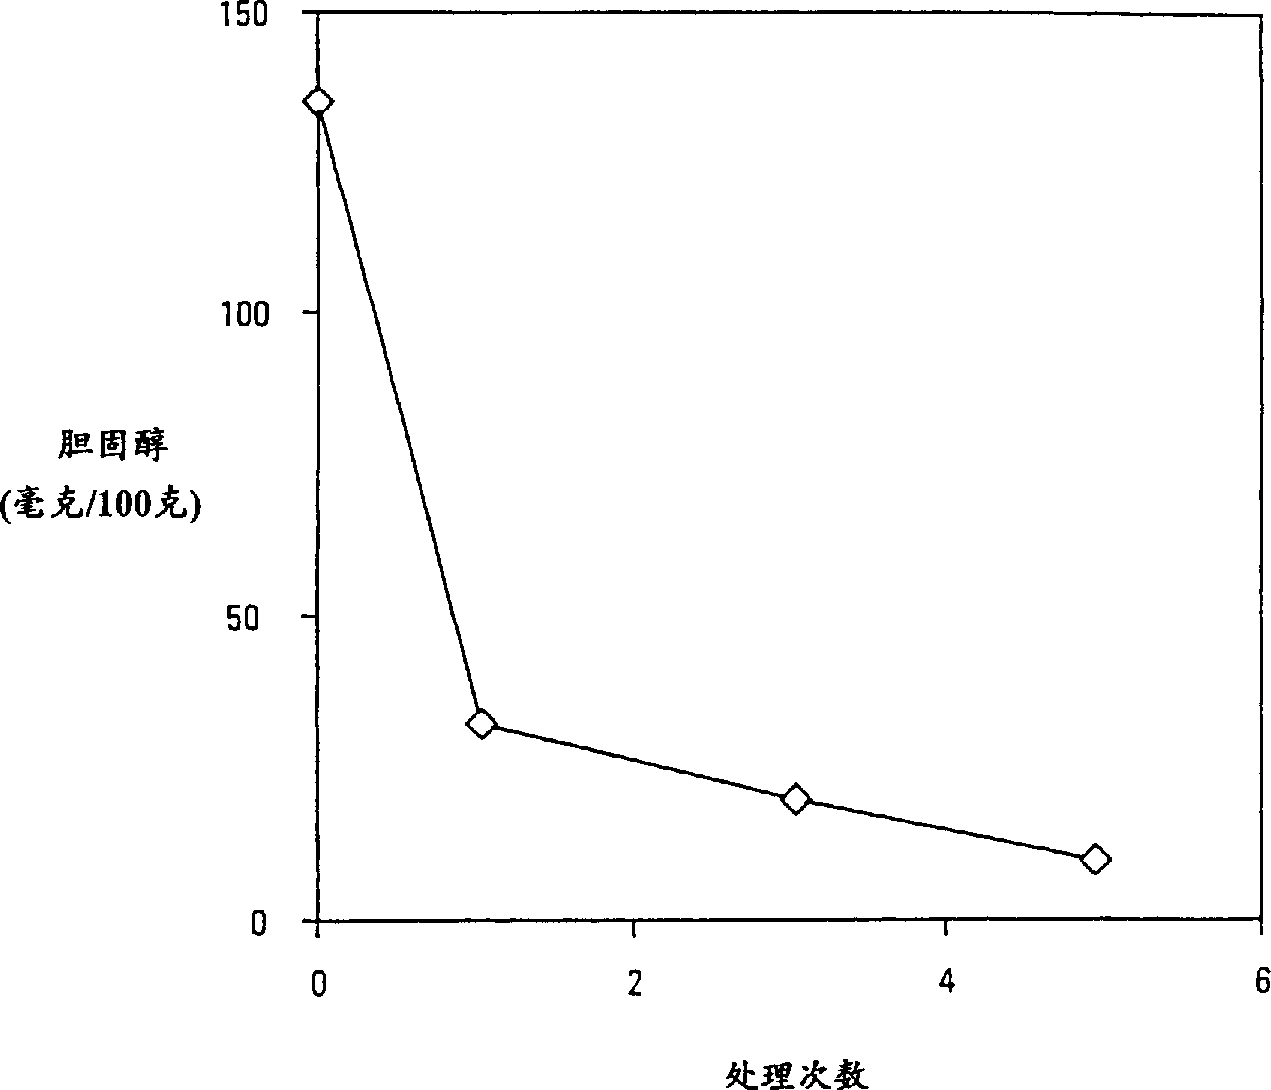 Phospholipid-based removal method of sterols from fats and oil